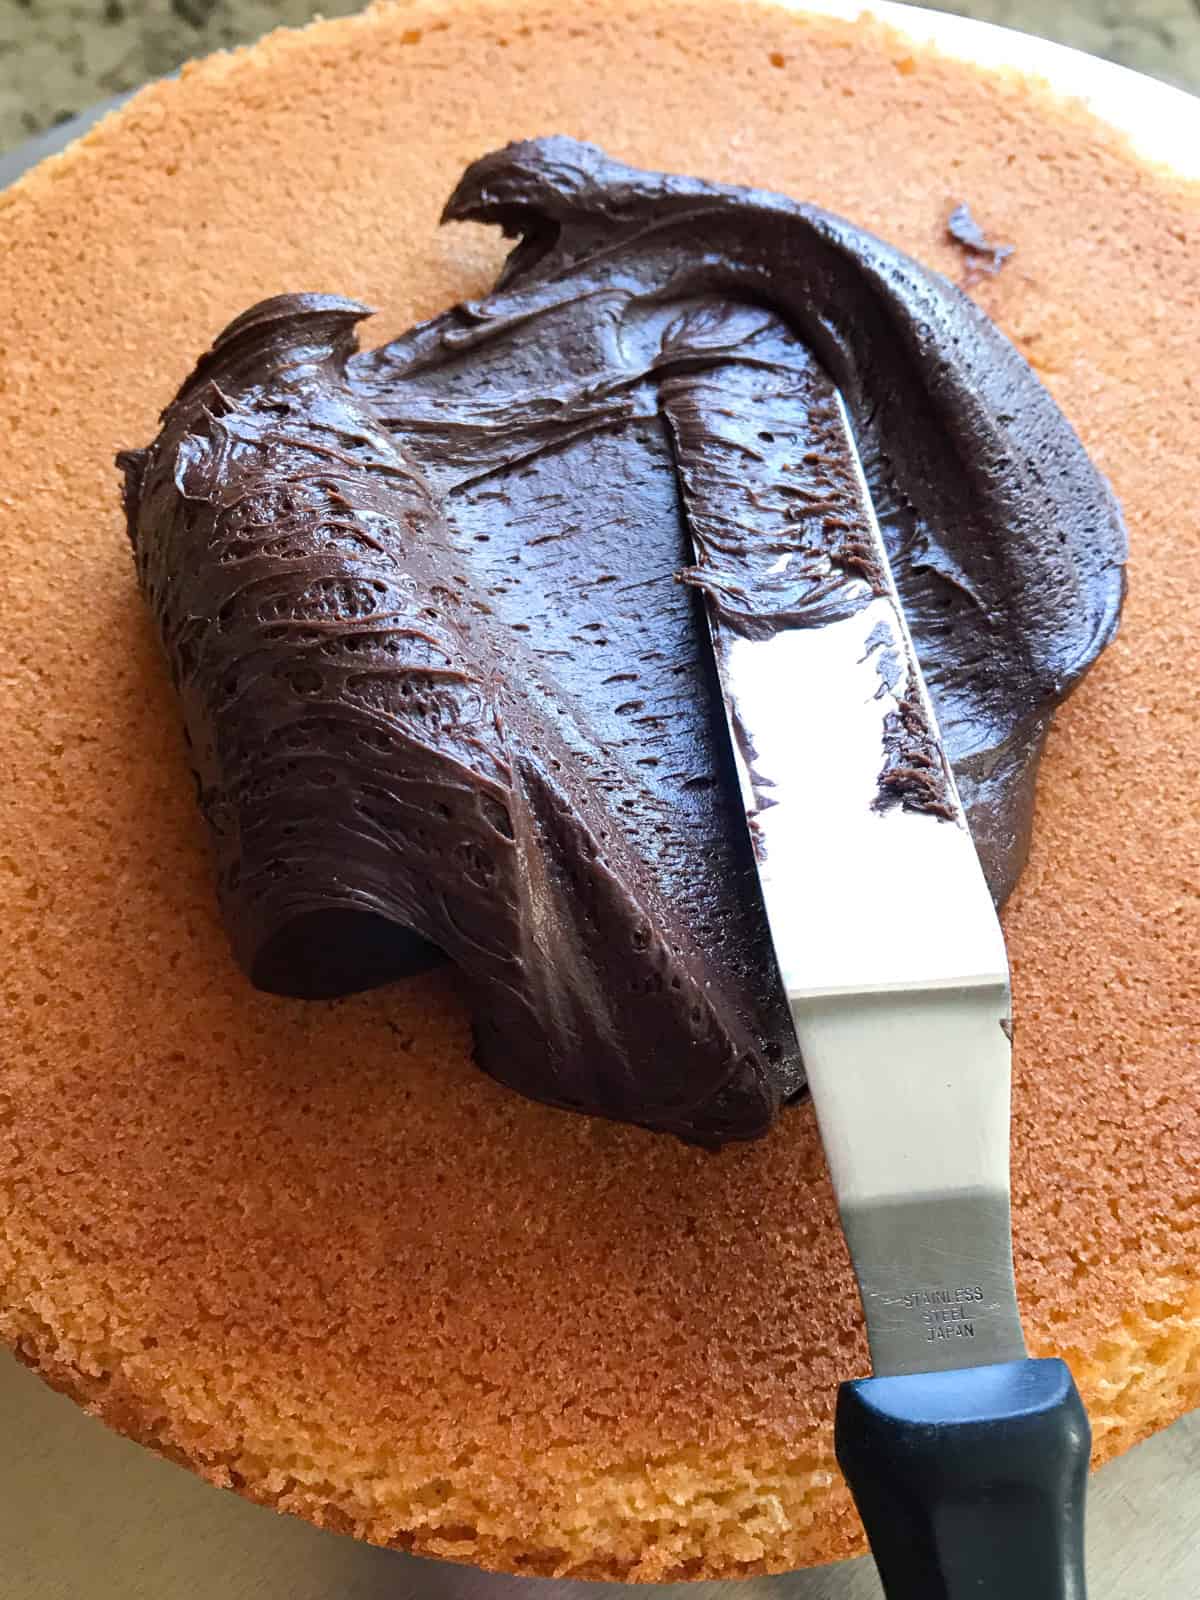 Spreading chocolate frosting on a gluten-free yellow cake round.